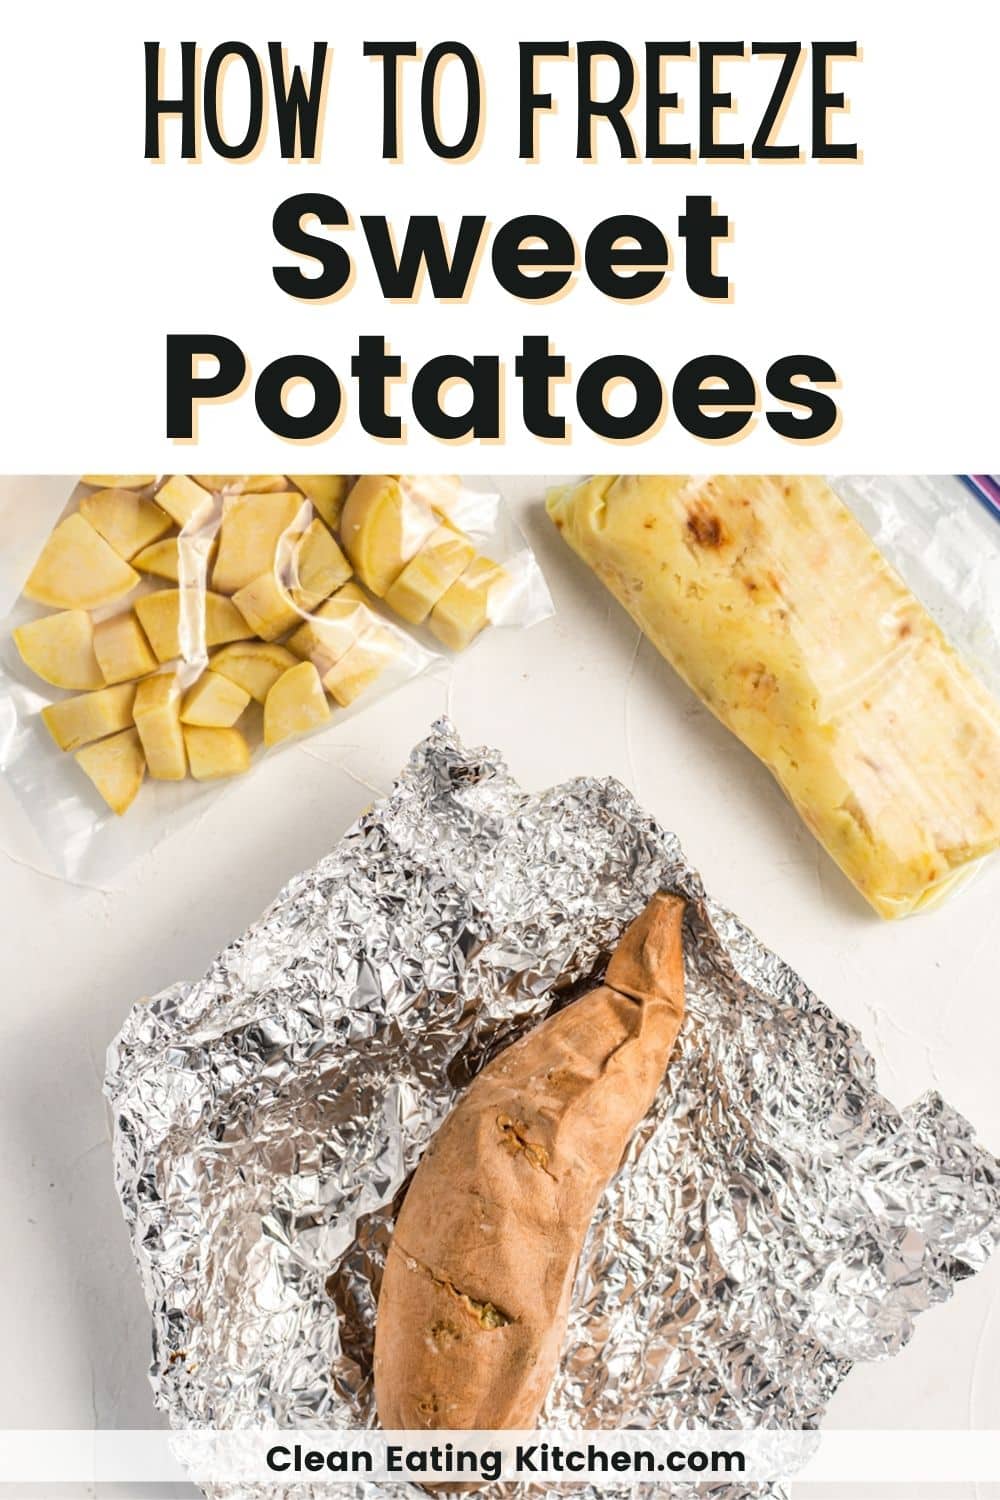 Can You Freeze Sweet Potatoes - Clean Eating Kitchen